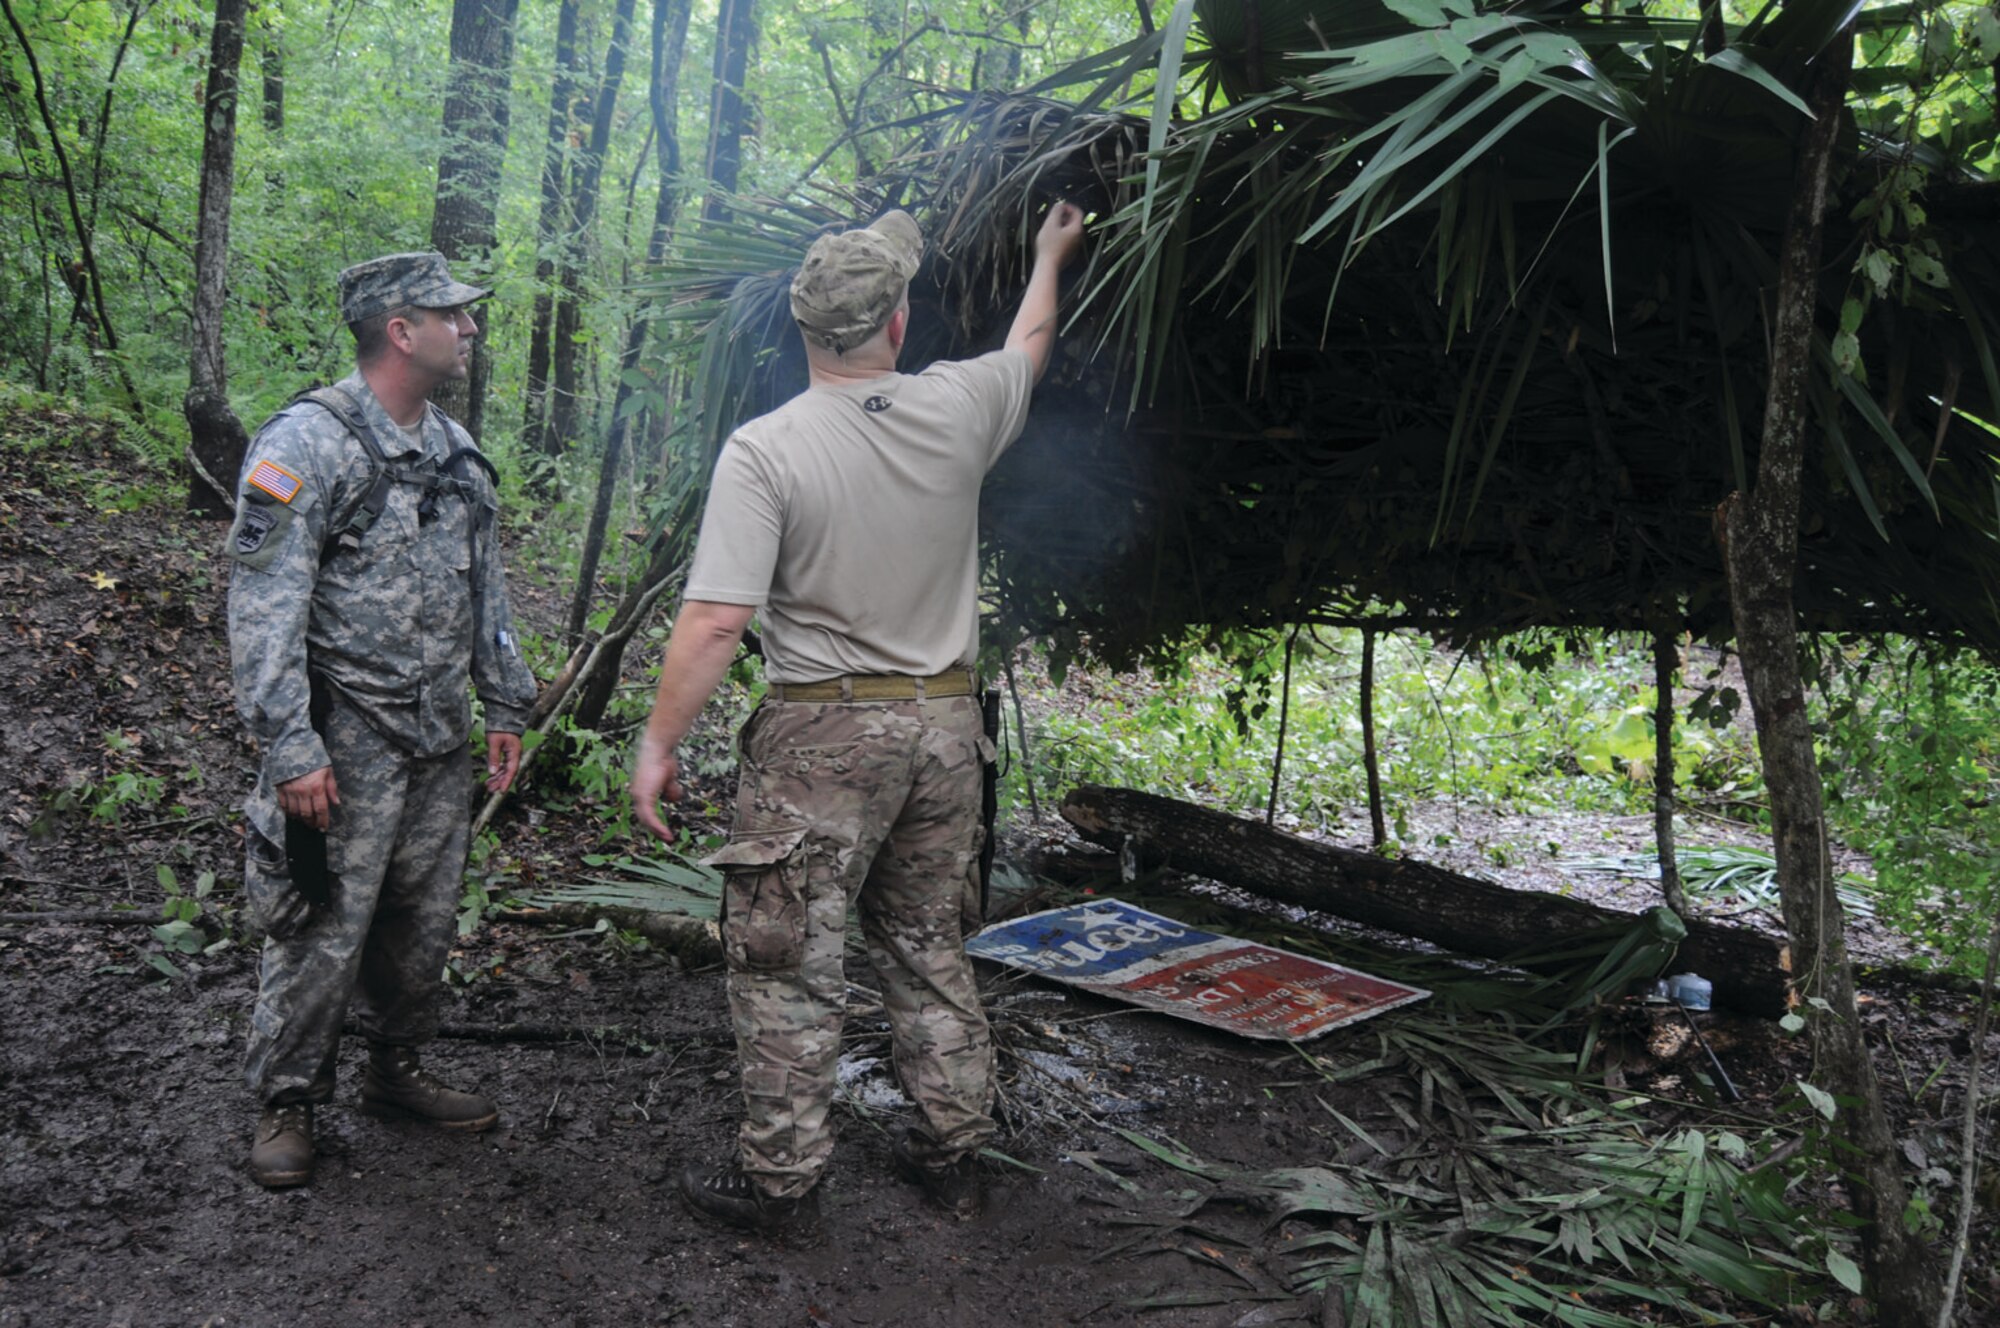 A student explains to medic Sgt. 1st Class Remo Soldaini, 1st Bn (Abn), 509th Inf Reg, how he and his team wove palm fronds and other natural materials into a rainproof shelter during a survival exercise held Aug. 30-Sept. 1 in the Atchafalaya Basin. (U.S. Army photo by Jean Dubiel)